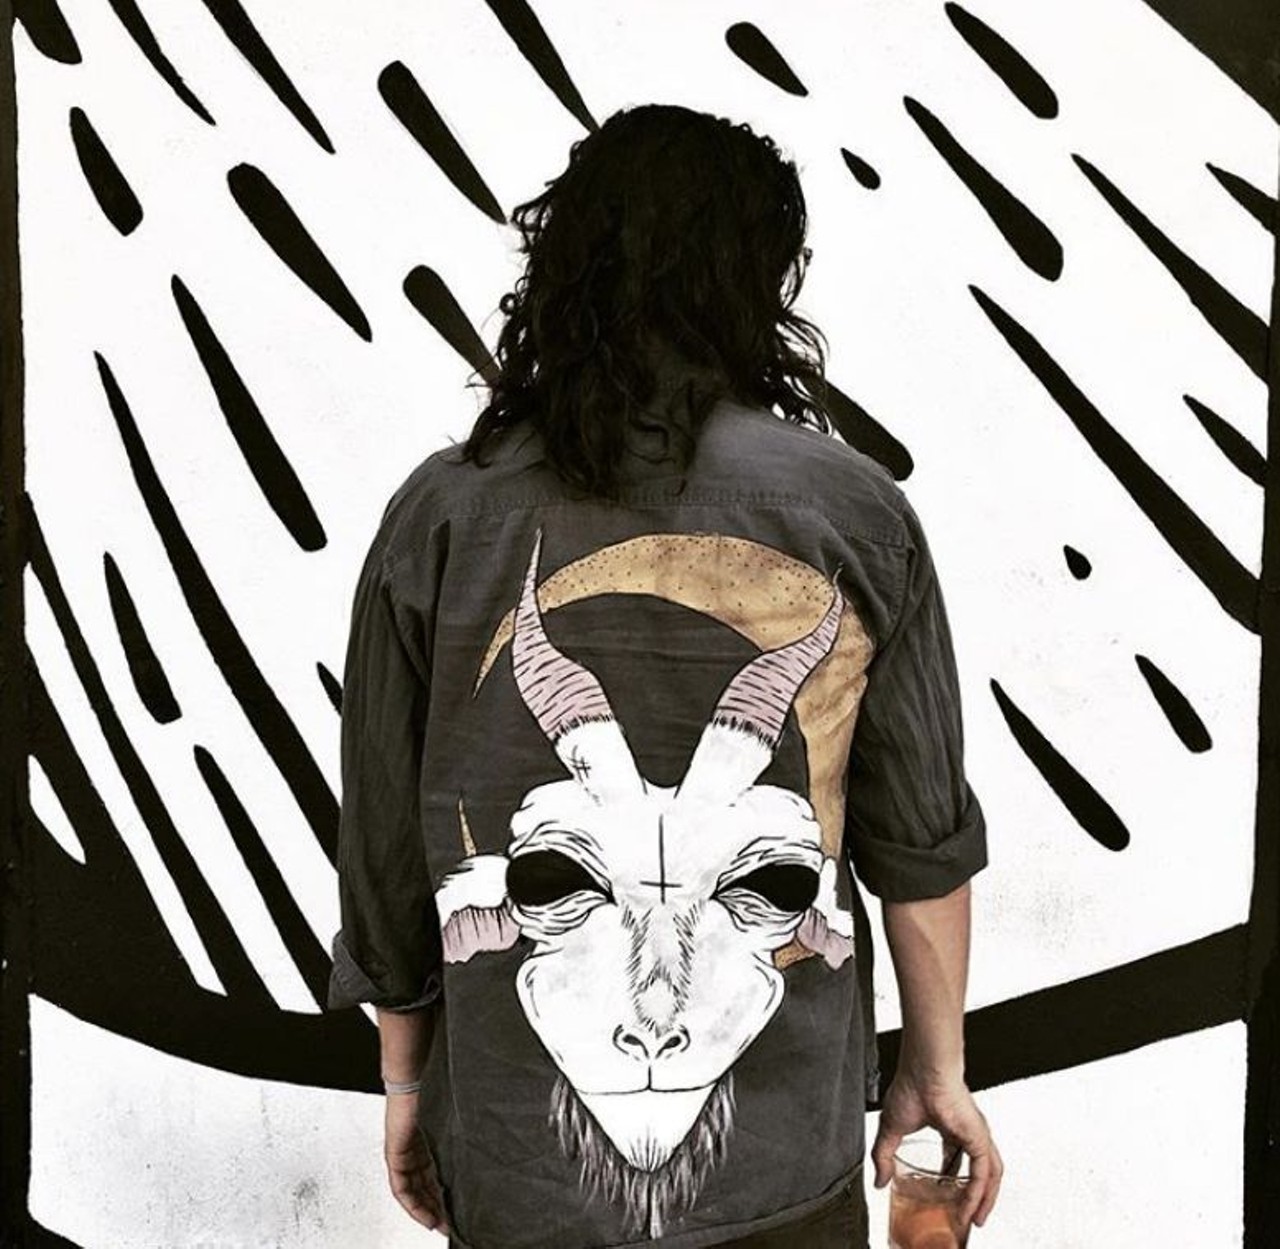 Gilly Jean  
Inspired by metal music and dark magic, these hand-painted vintage jean jackets are all one of a kind and original as hell.
Photo via gilly_jean / Instagram